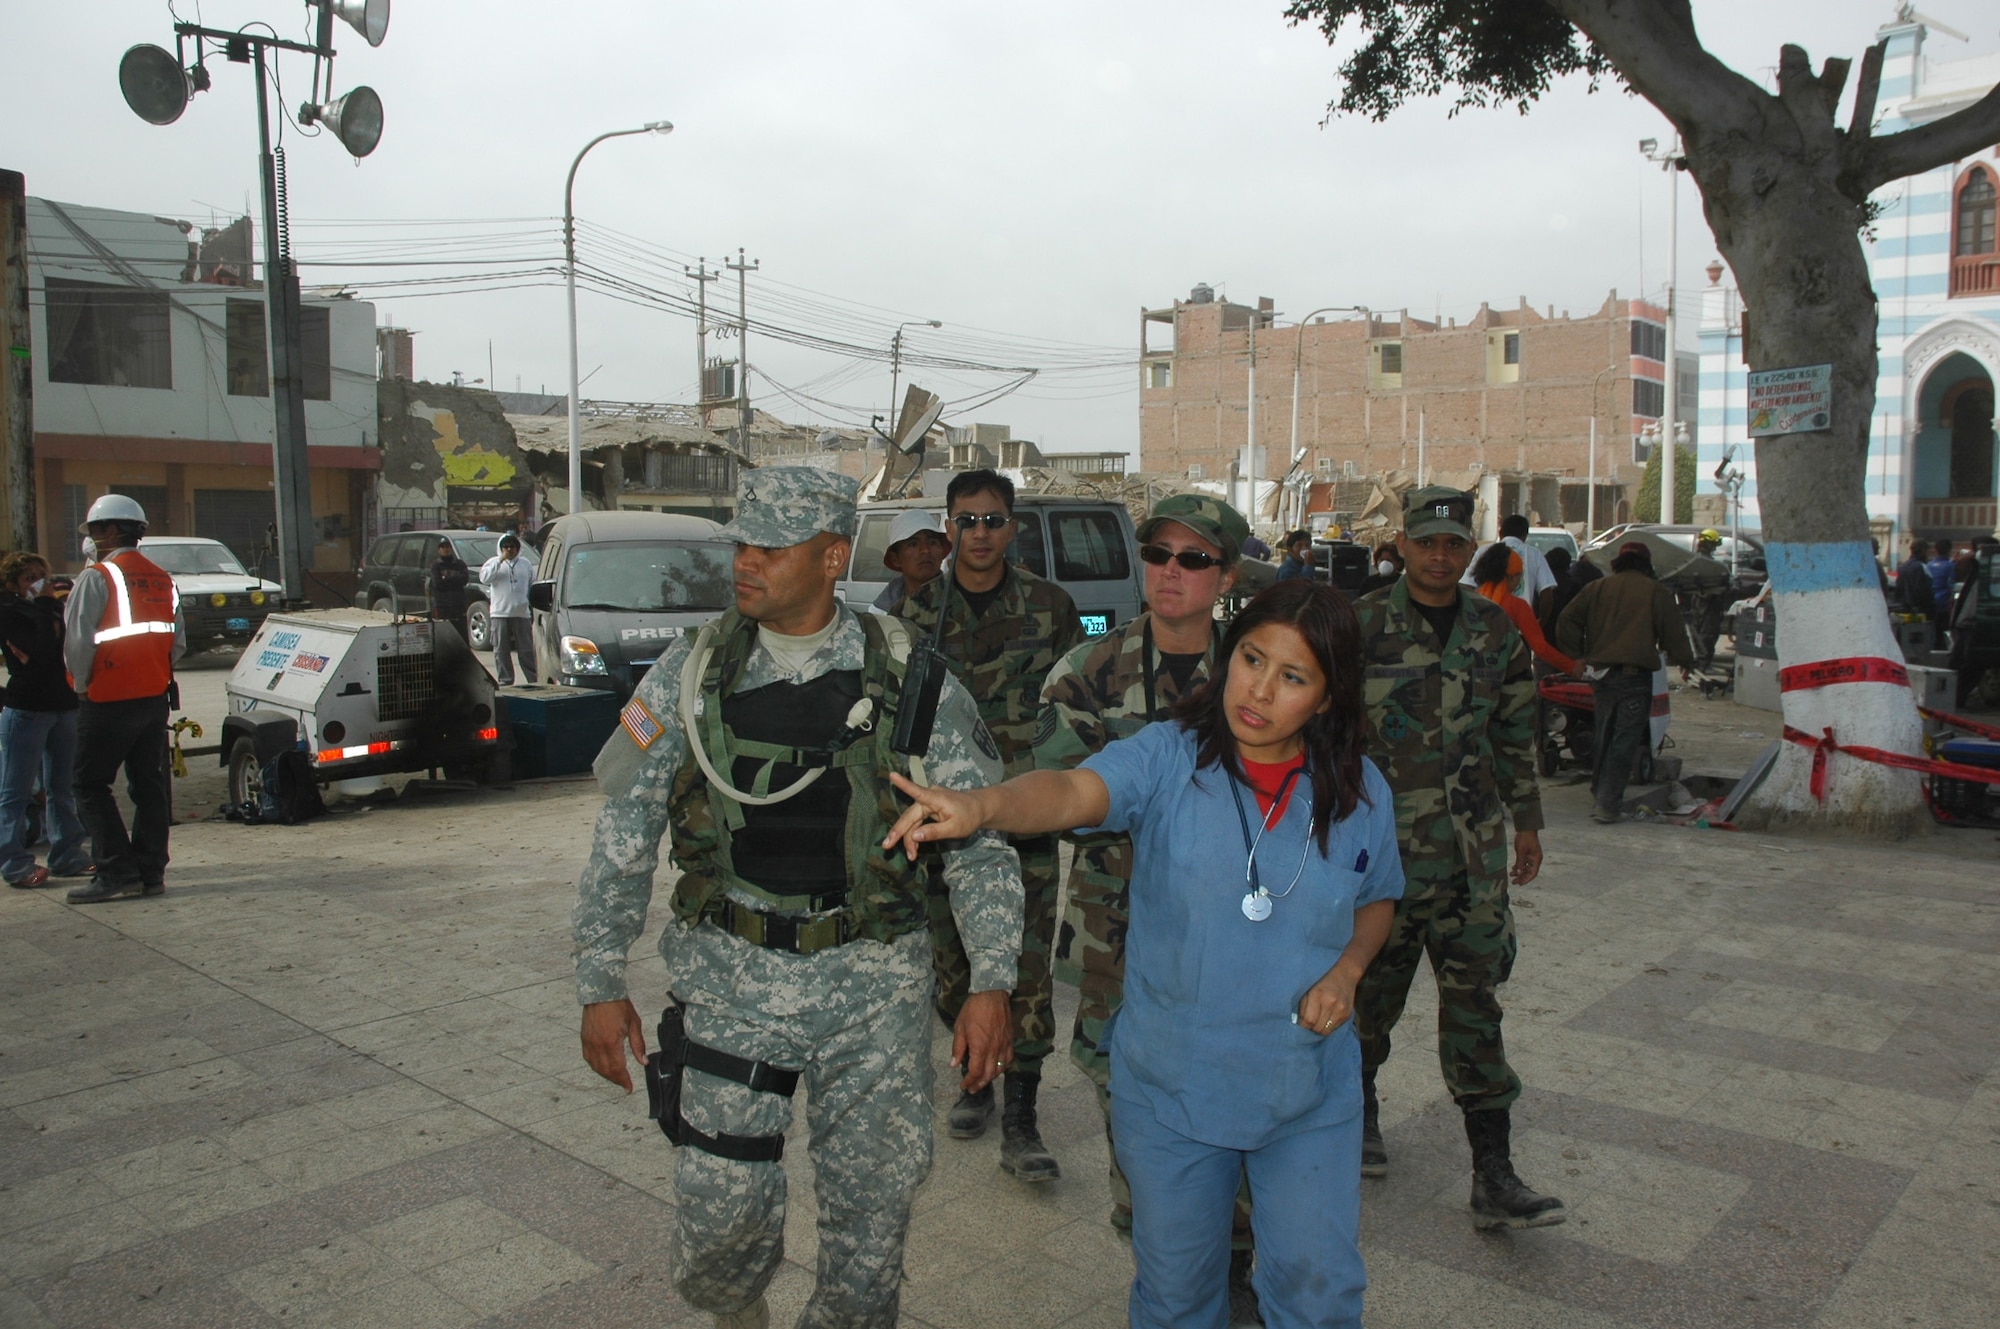 PISCO, Peru -- Army Private 1st Class David Torres, Joint Task Force-Bravo Joint Security Forces member, gets information on the town of Pisco from Maricarmen Perez, a local paramedic during the Task Force’s medical humanitarian mission. Members of JTF-Bravo, Soto Cano Air Base, Honduras, traveled to Peru to assist in relief following the 8.0 magnitude earthquake which struck the region Aug. 15.  (U.S. Army photo by Spec. Grant Vaught)